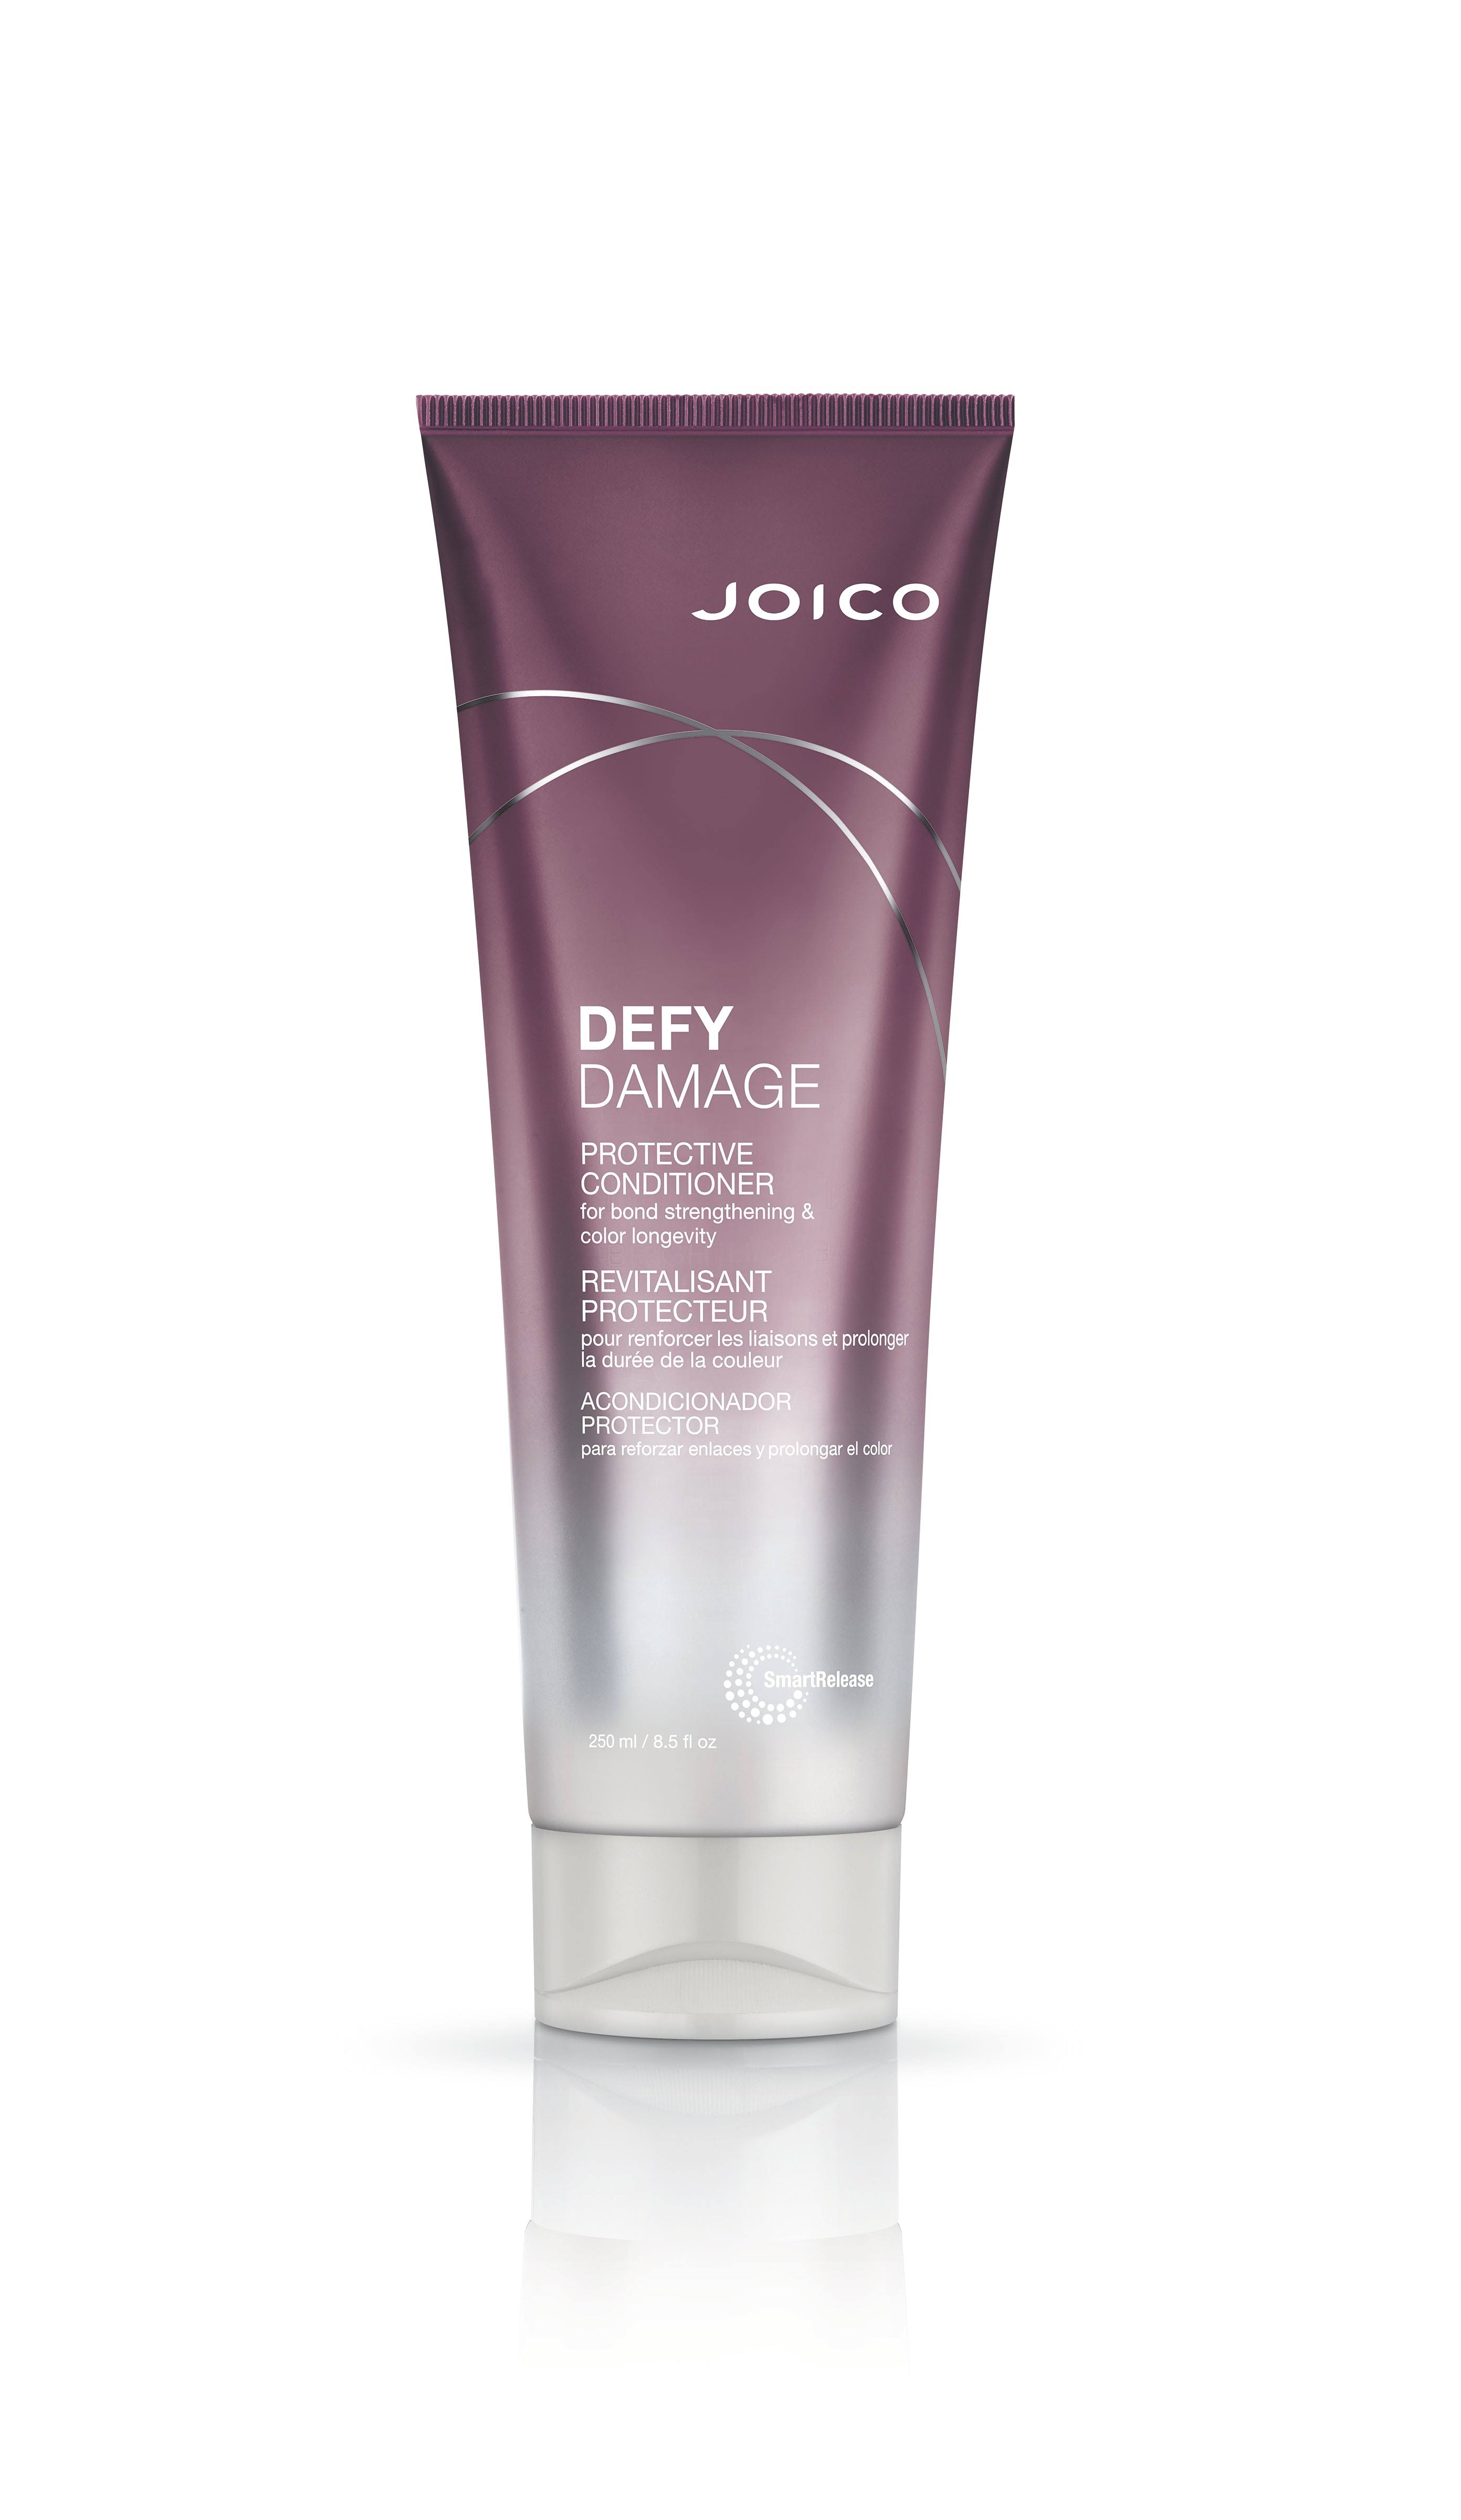 Joico Defy Damage Protective Conditioner 250.0 mL